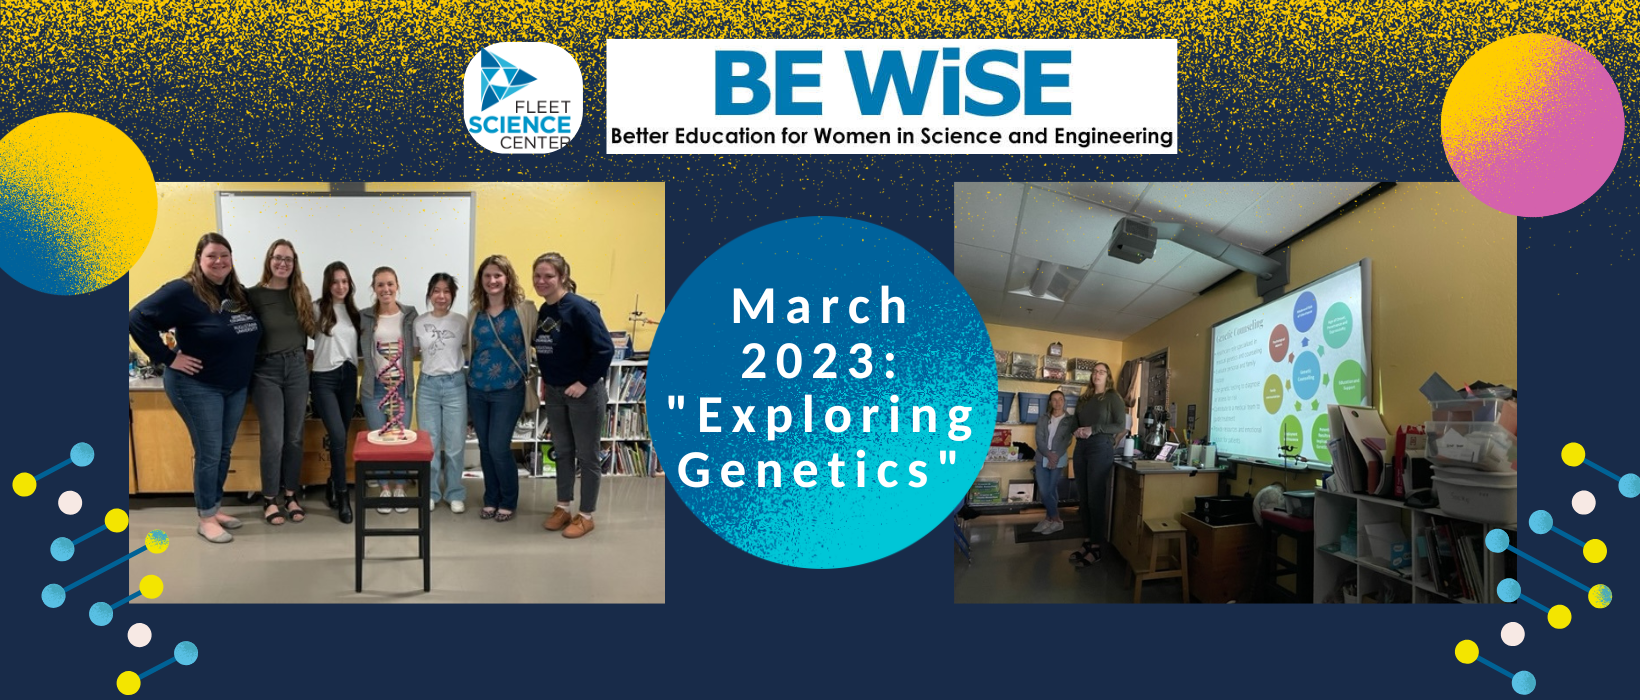 5 of 7, The Fleet Science Center logo appears next to the BE WiSE (Better Education for Women in Science and Engineering) logo at the top of the image. A picture on the left shows Taylor Berninger standing with the genetic counseling graduate students who presented the session. A picture on the right show two presenters in front of a screen giving their presentation. In the center of the image is a circle with the words "March 2023: Exploring Genetics"